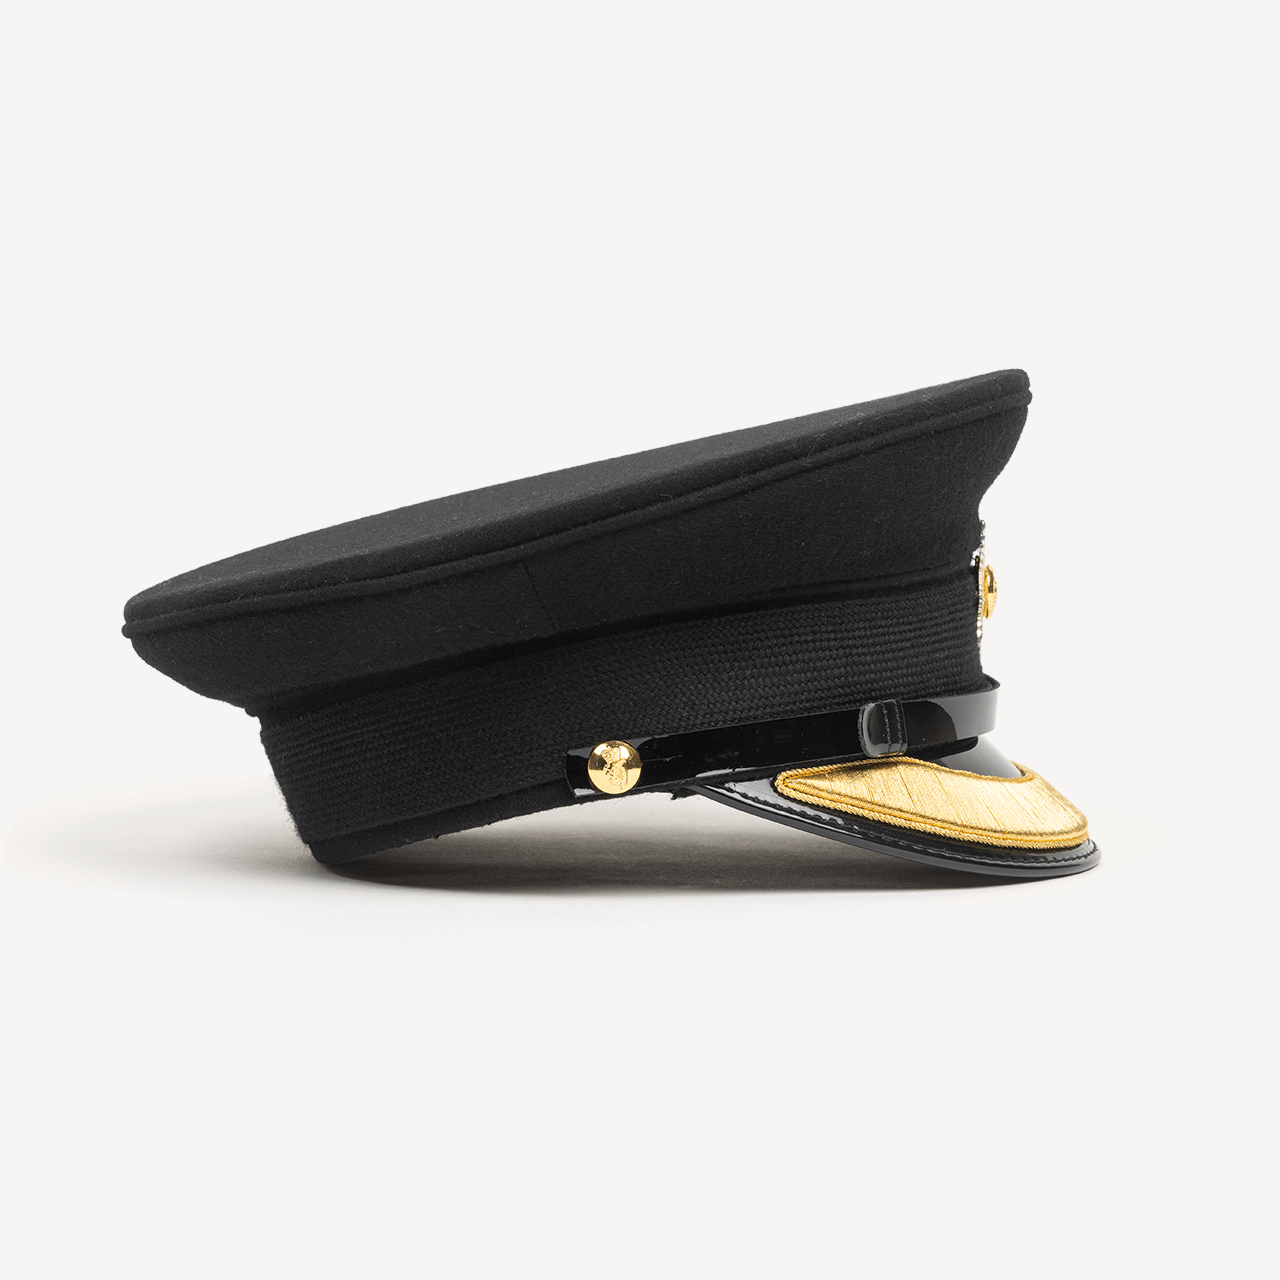 No.1 SERVICE DRESS HATS WITH GOLD PEAKS - Swaine